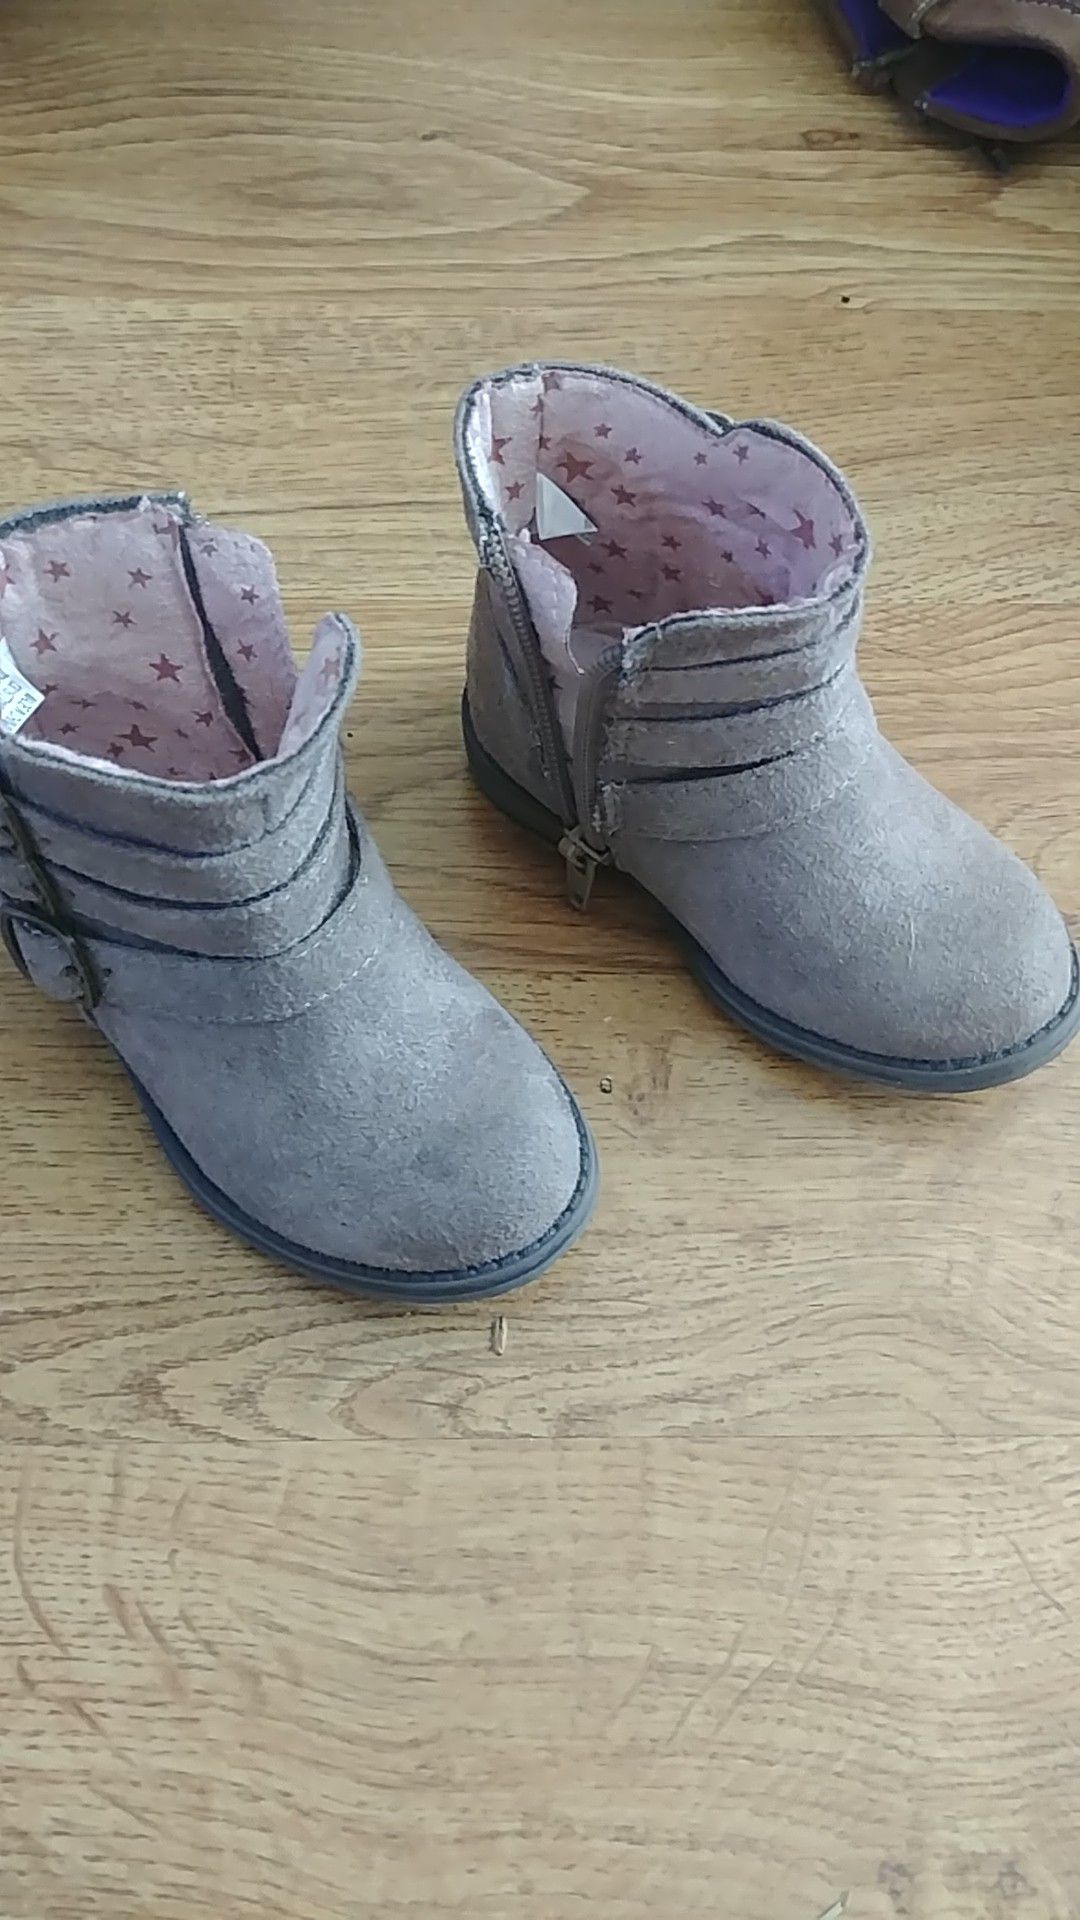 Size 5 toddler girls boots